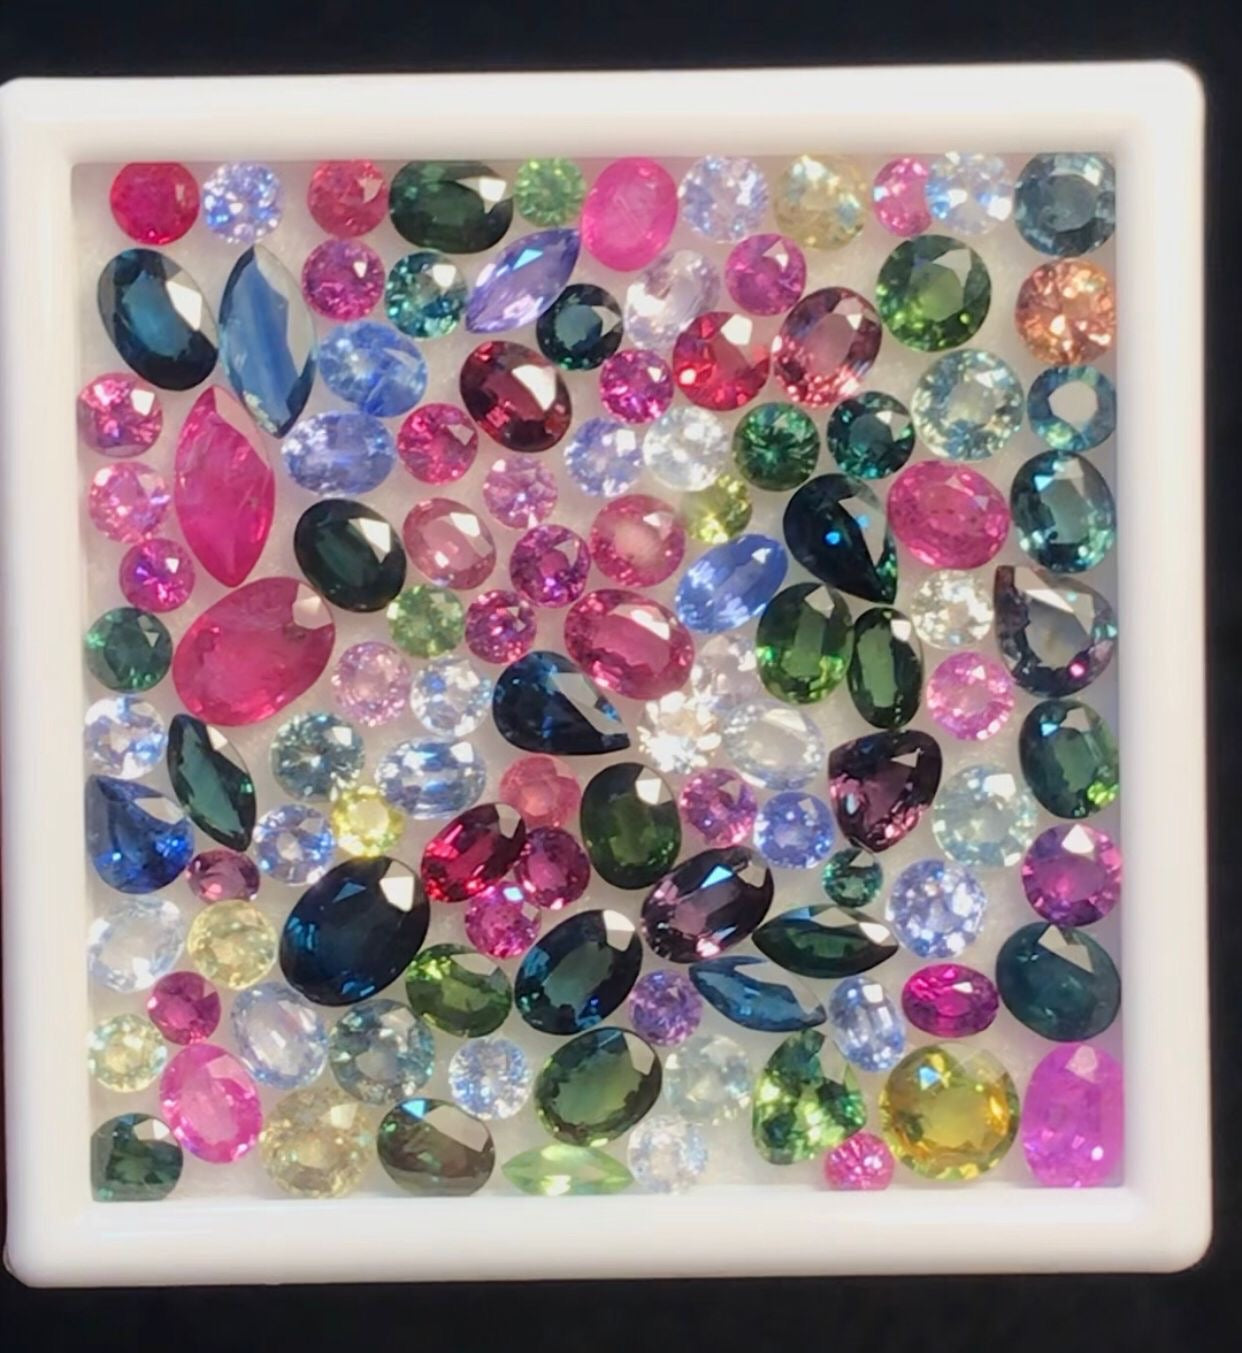 40 Carats Natural colourful Loose Sapphires Stones